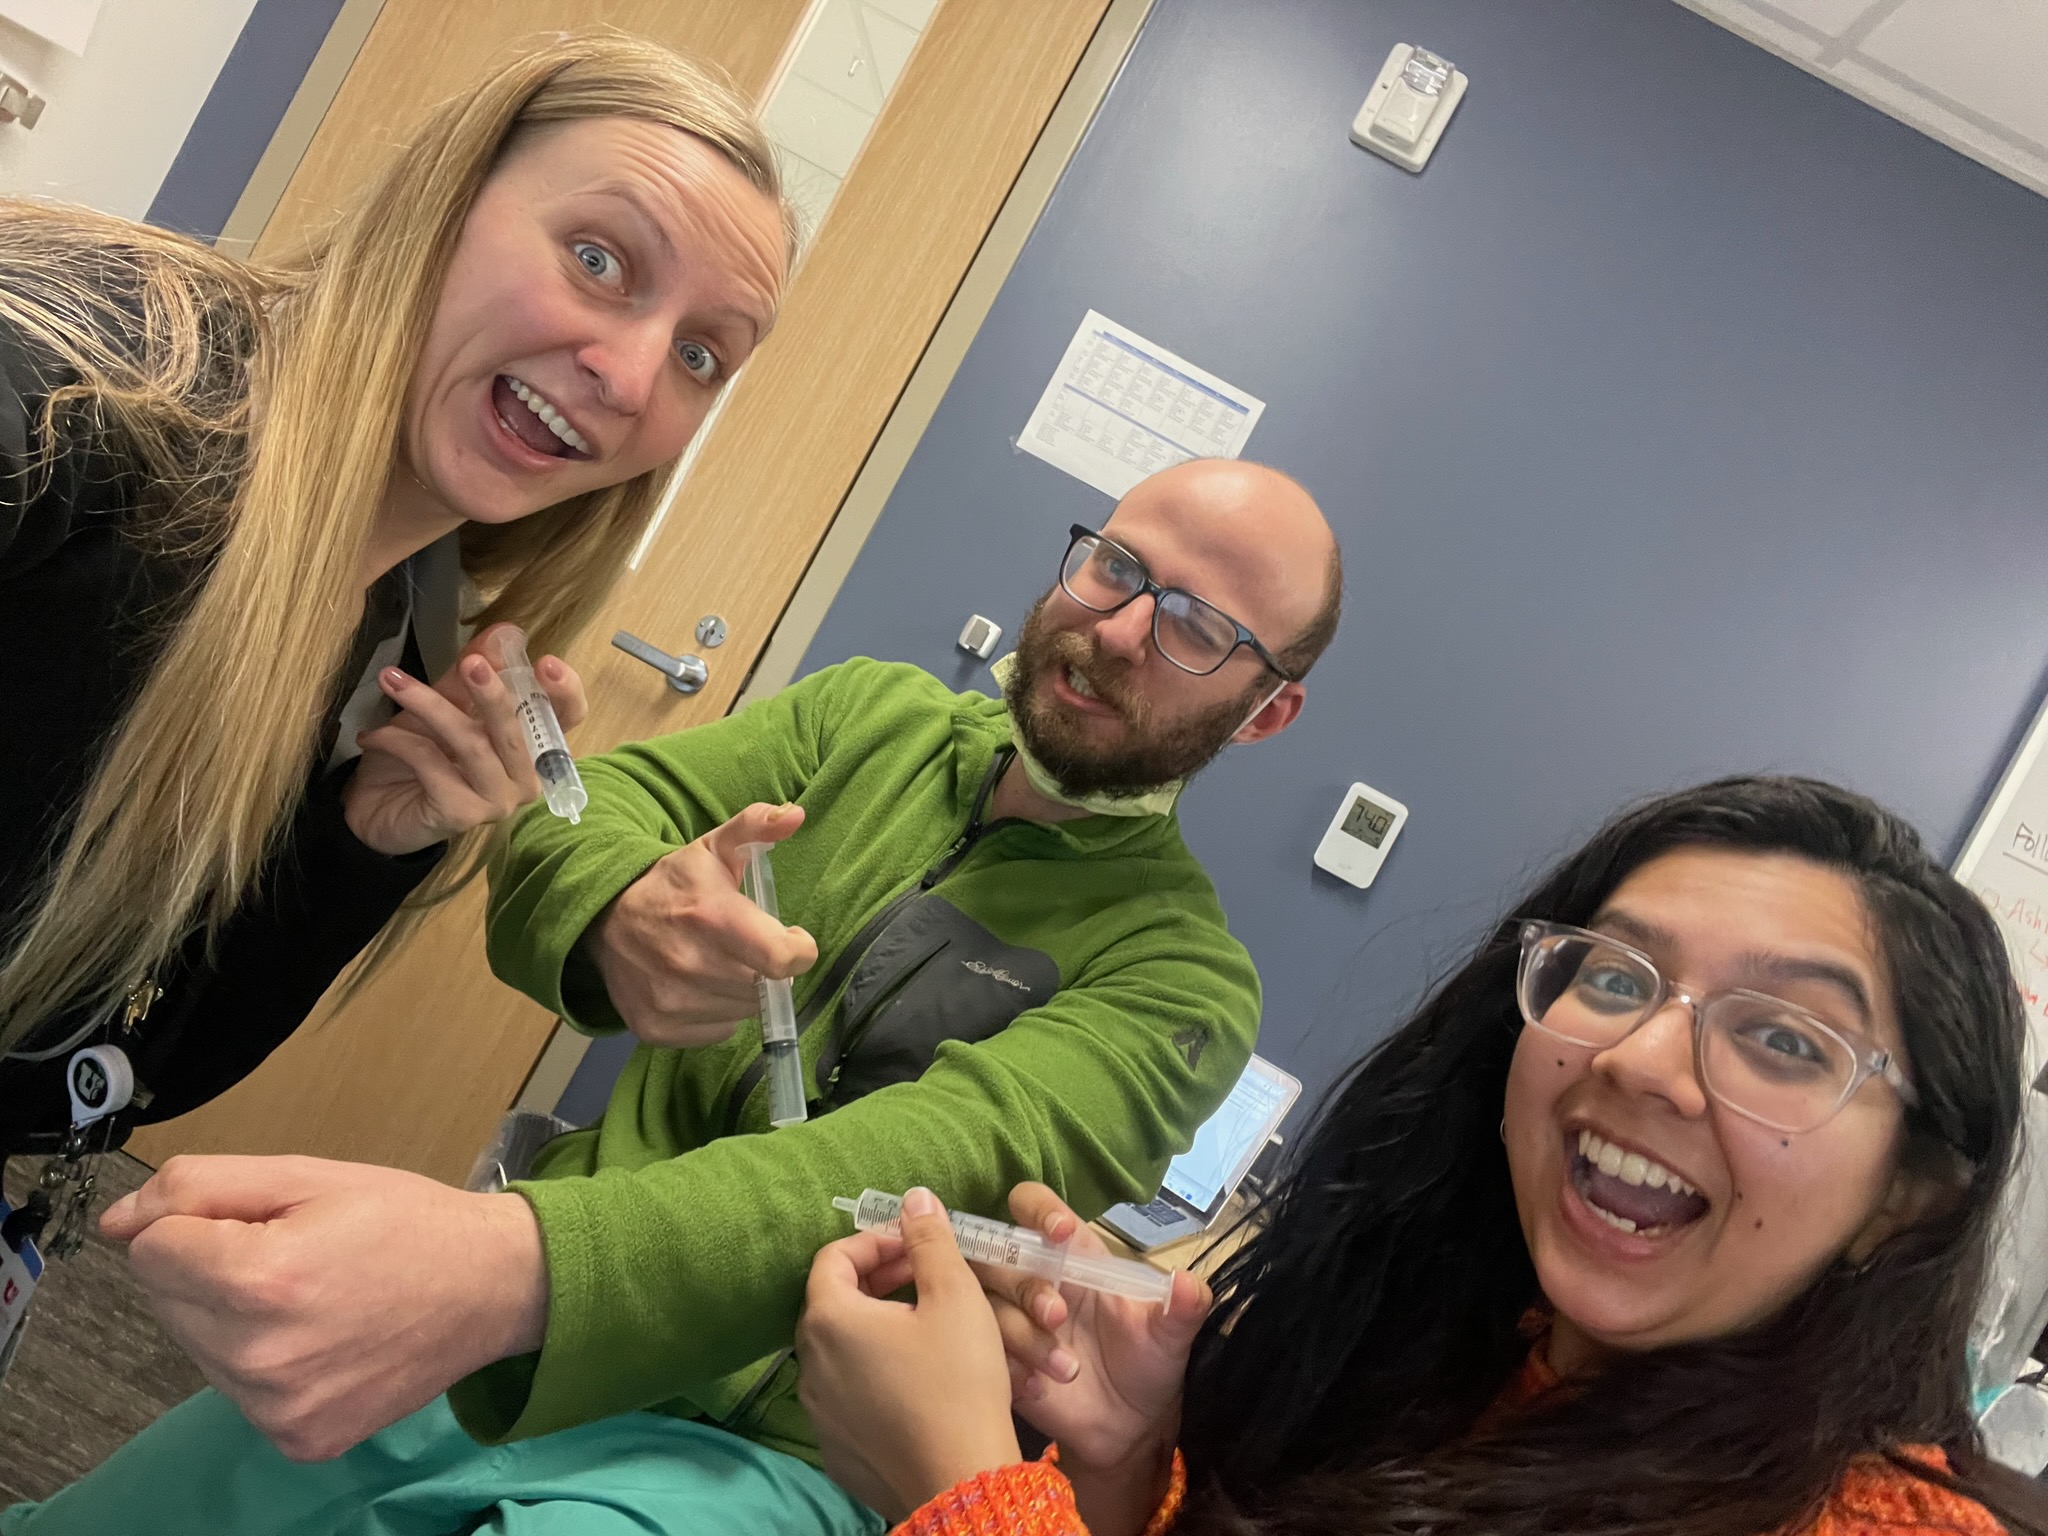 3 residents with silly expressions holding empty medicine applicators